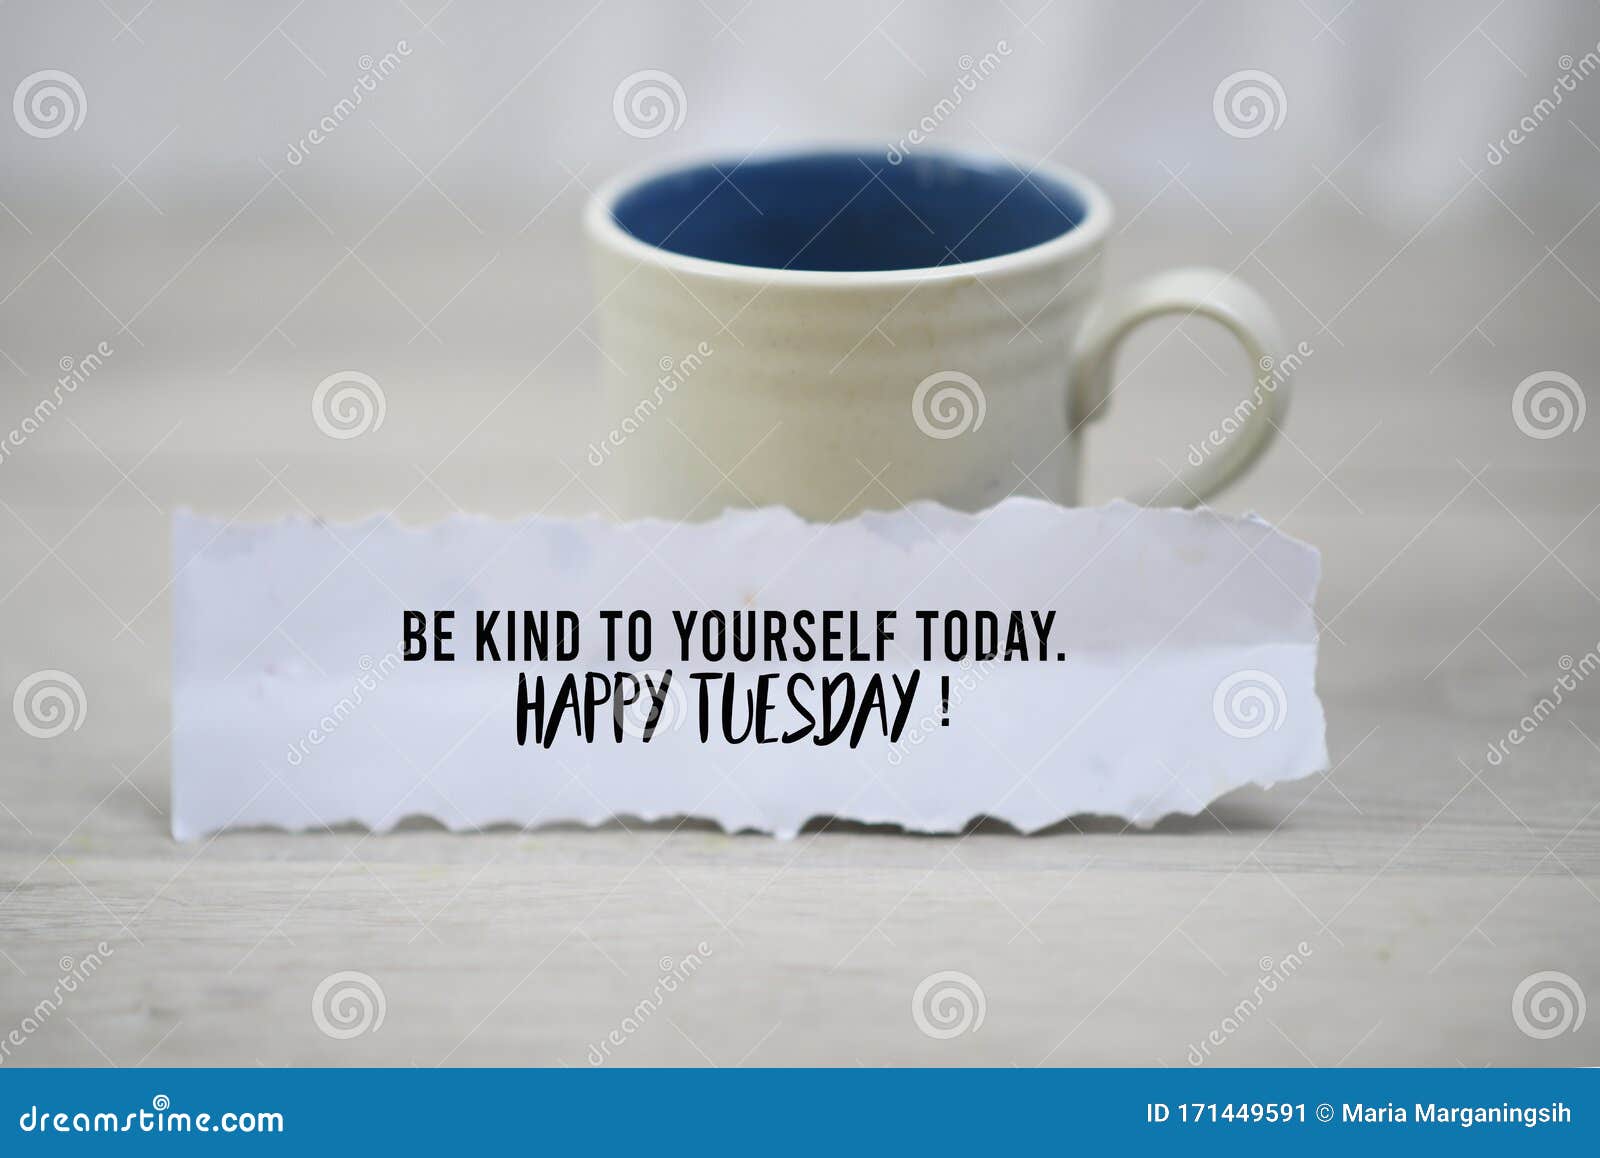 Inspirational Quote - Be Kind To Yourself Today. Happy Tuesday. with a Cup  of Morning Coffee and a White Paper Note  Stock Image - Image of  background, love: 171449591